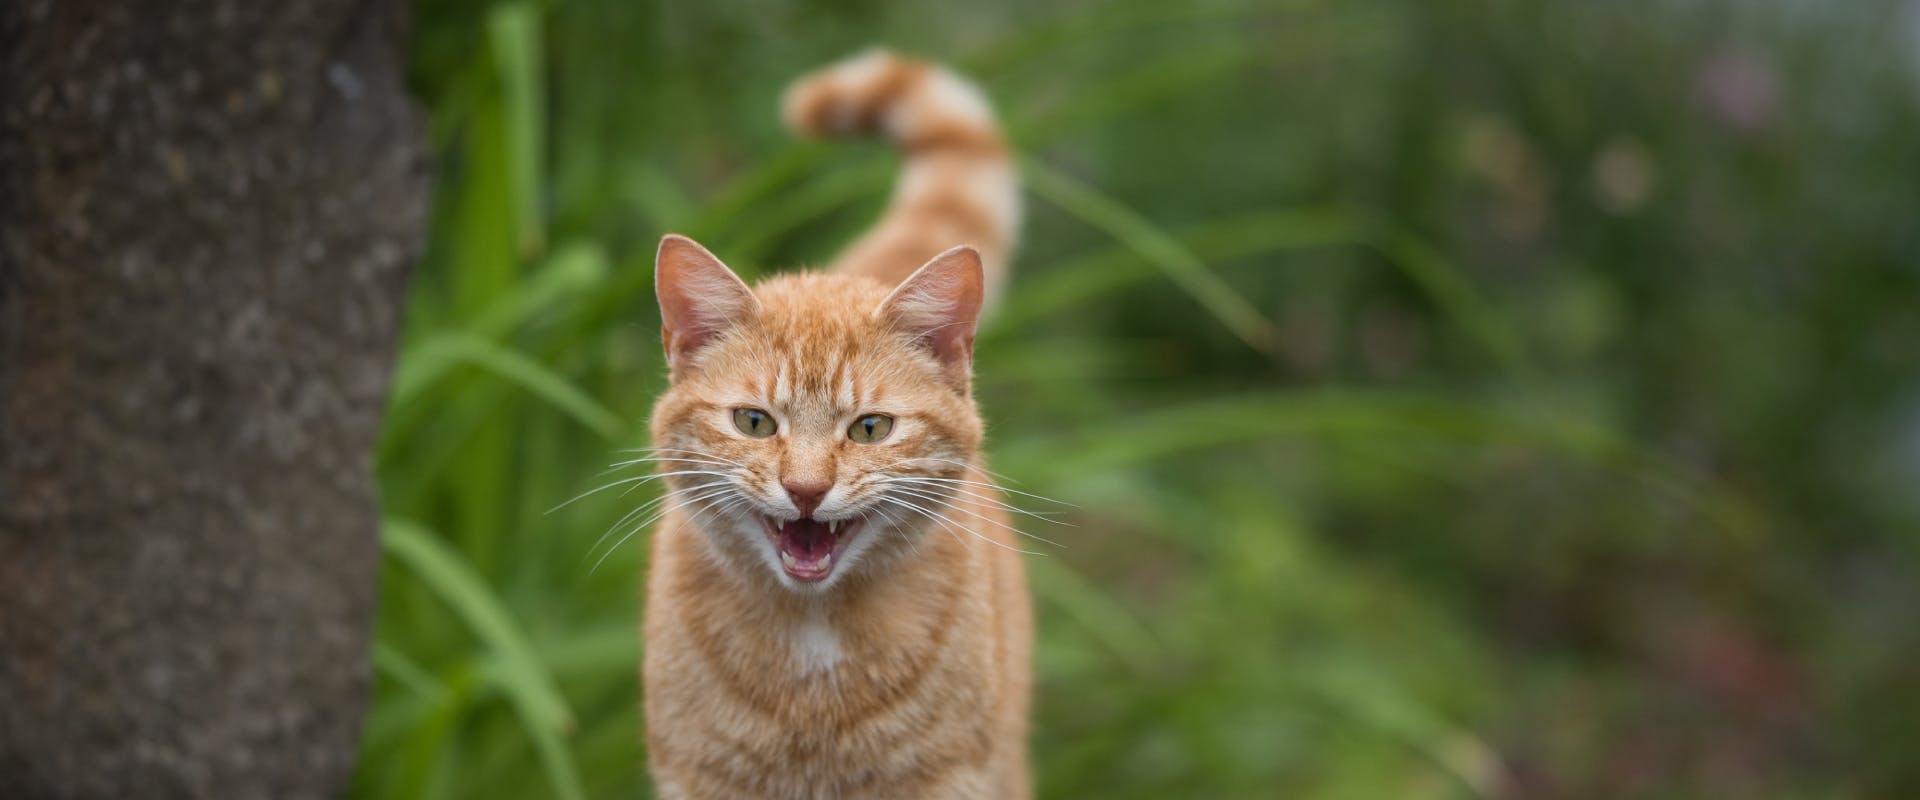 A ginger cat meowing excessively.